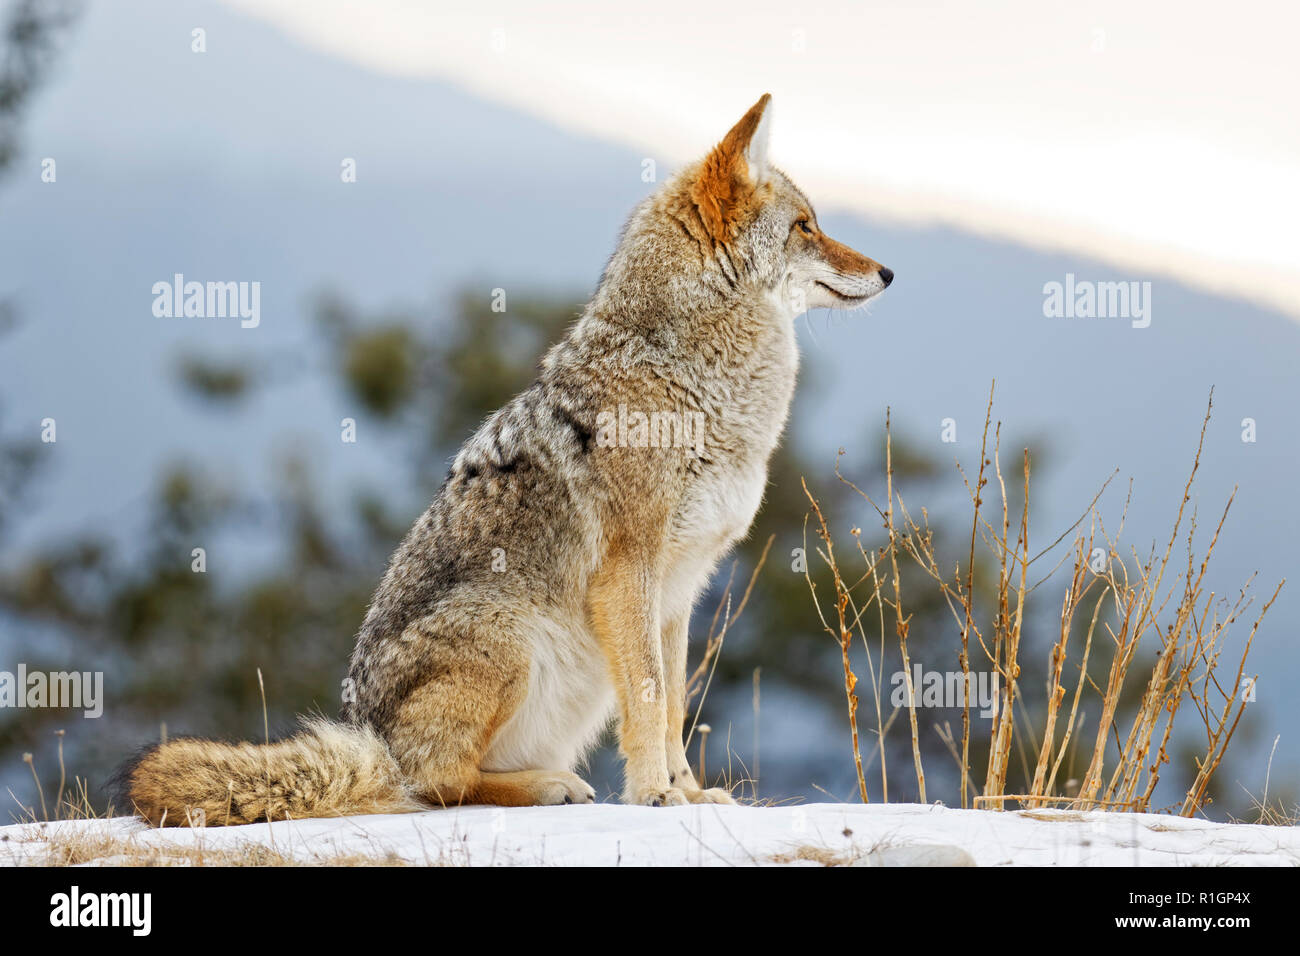 42,757.09746 close up of a Coyote sitting broadside right & looking forward on a snowy hilltop, conifer tree and hazy mountain background Stock Photo